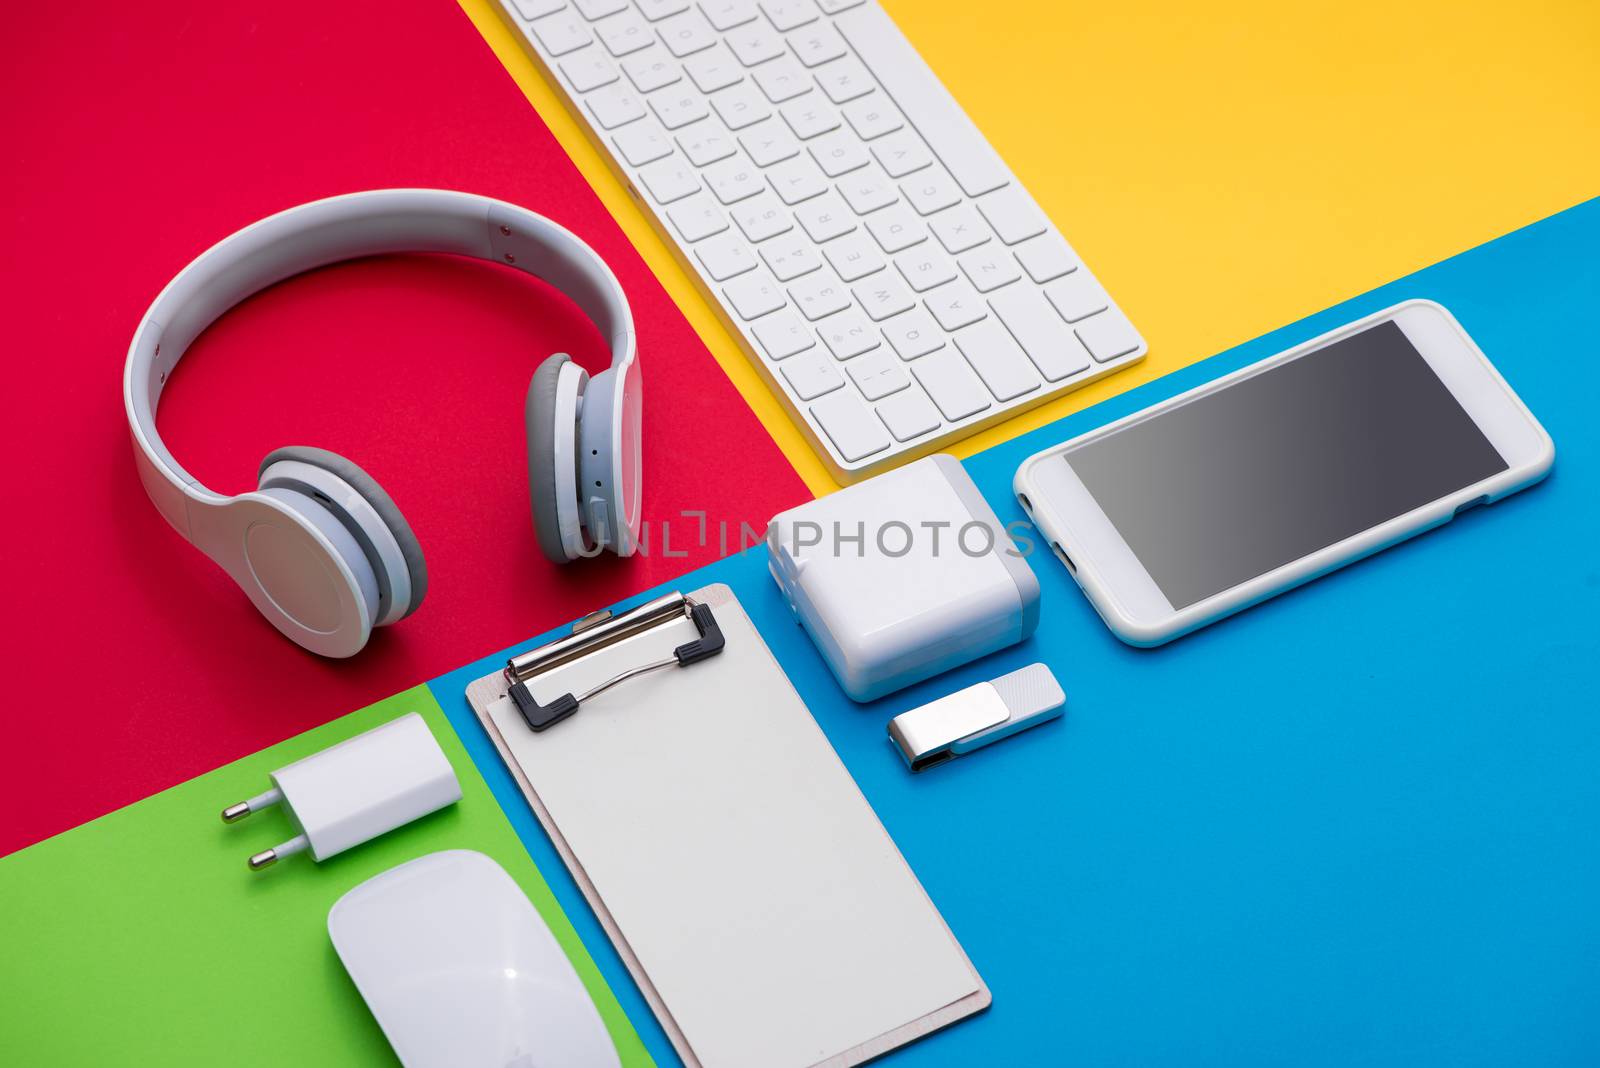 Well organised white office objects on colorful background by makidotvn